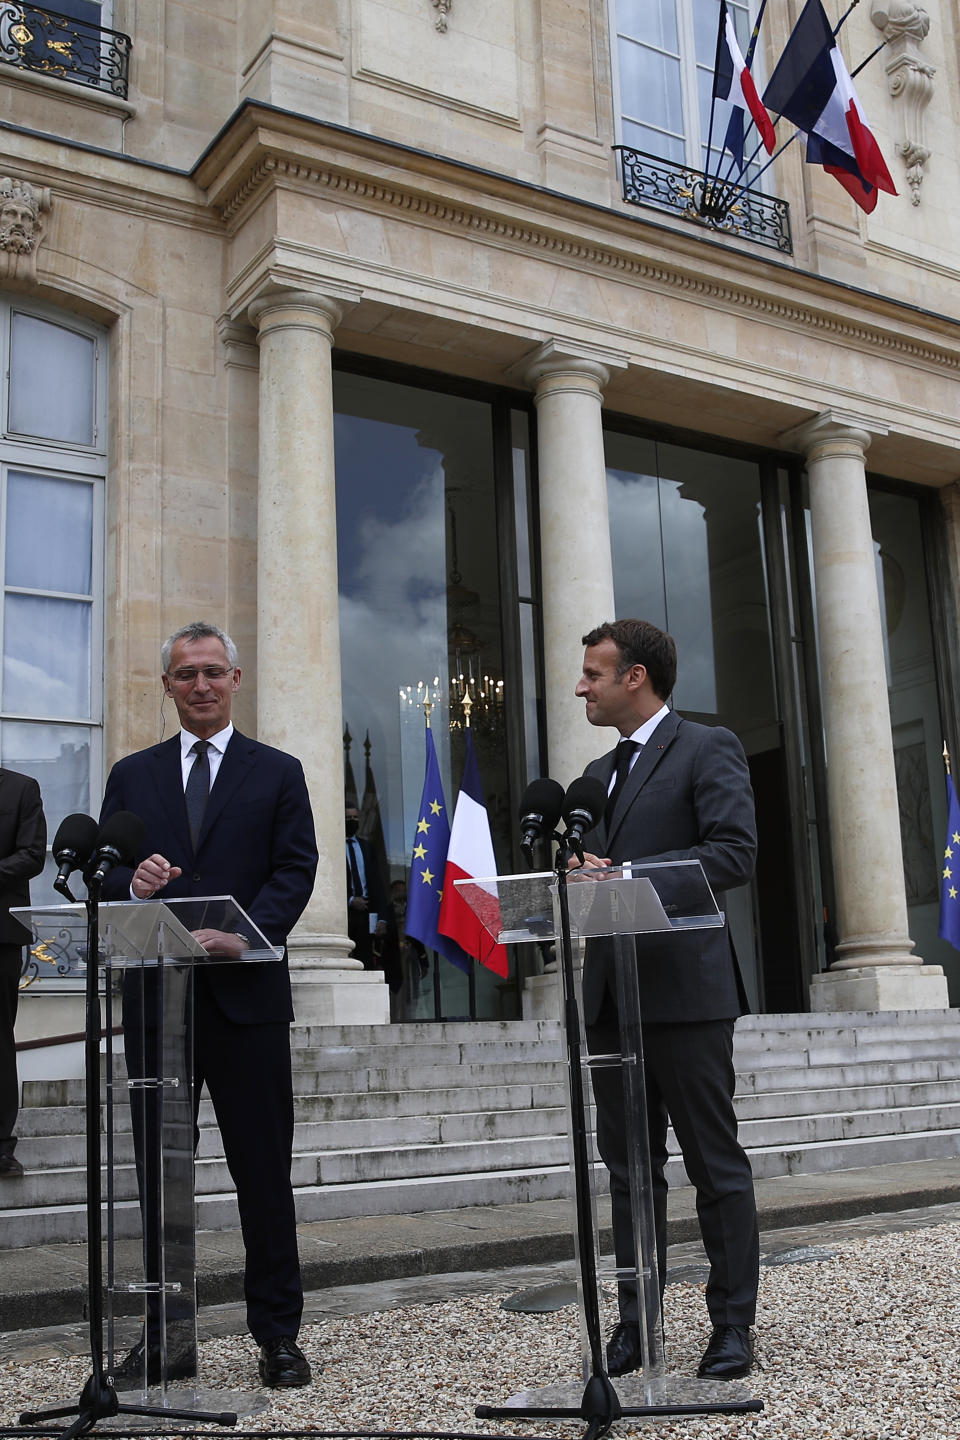 French President Emmanuel Macron, right, and NATO Secretary General Jens Stoltenberg deliver a statement to reporters Friday, May 21, 2021 after heir talks at the Elysee palace in Paris. (AP Photo/Francois Mori)